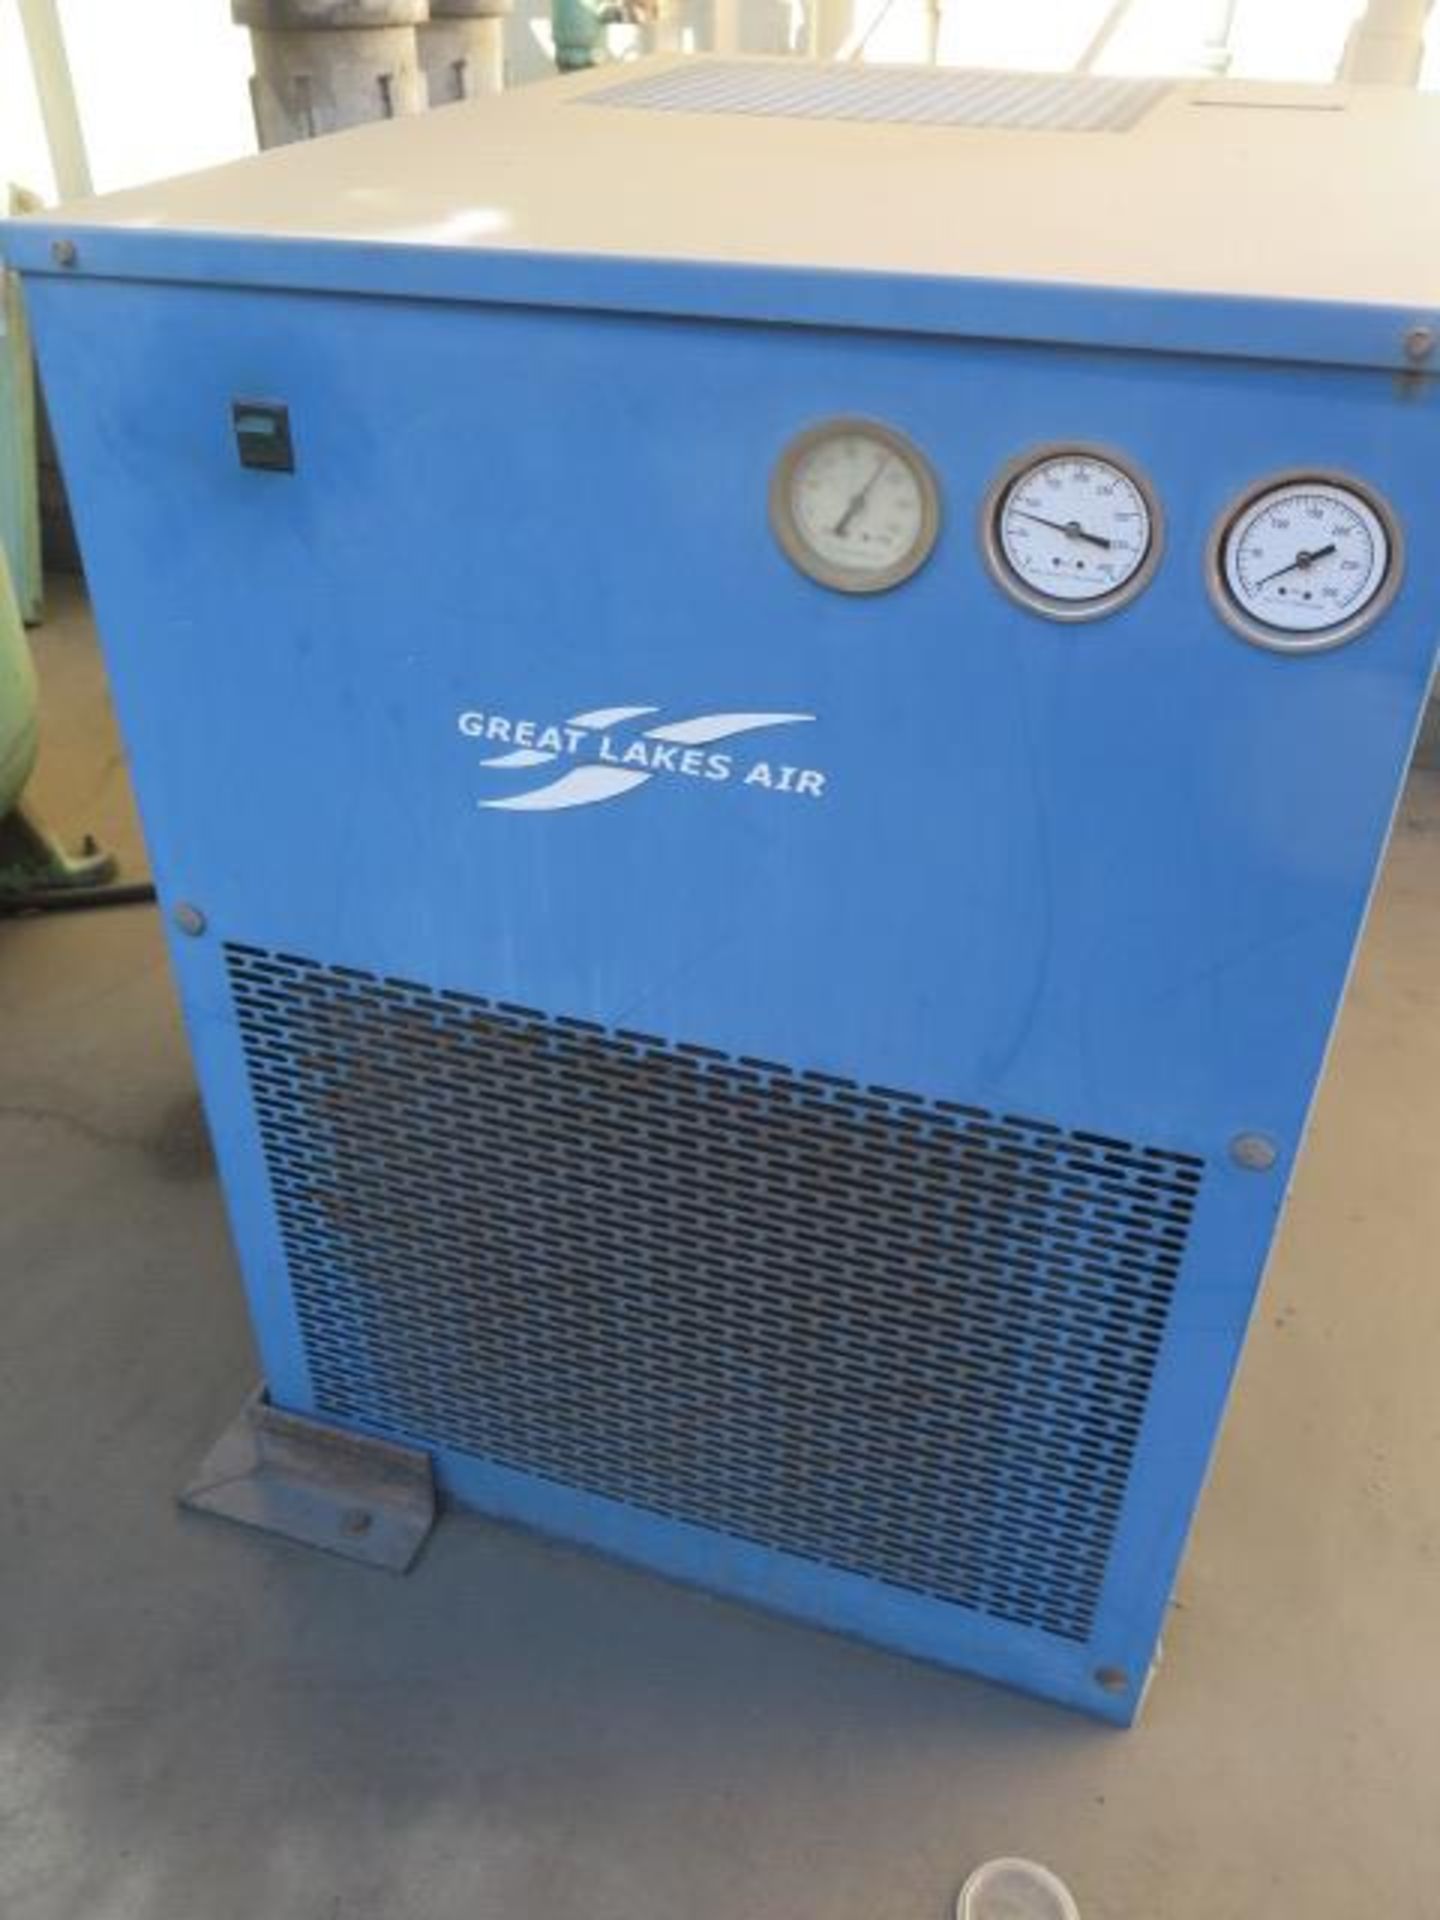 Gardner Denver "Electra-Screw" Rotary Air Compressor w/ Great Lakes Refrigerated Air Dryer and Air - Image 12 of 13